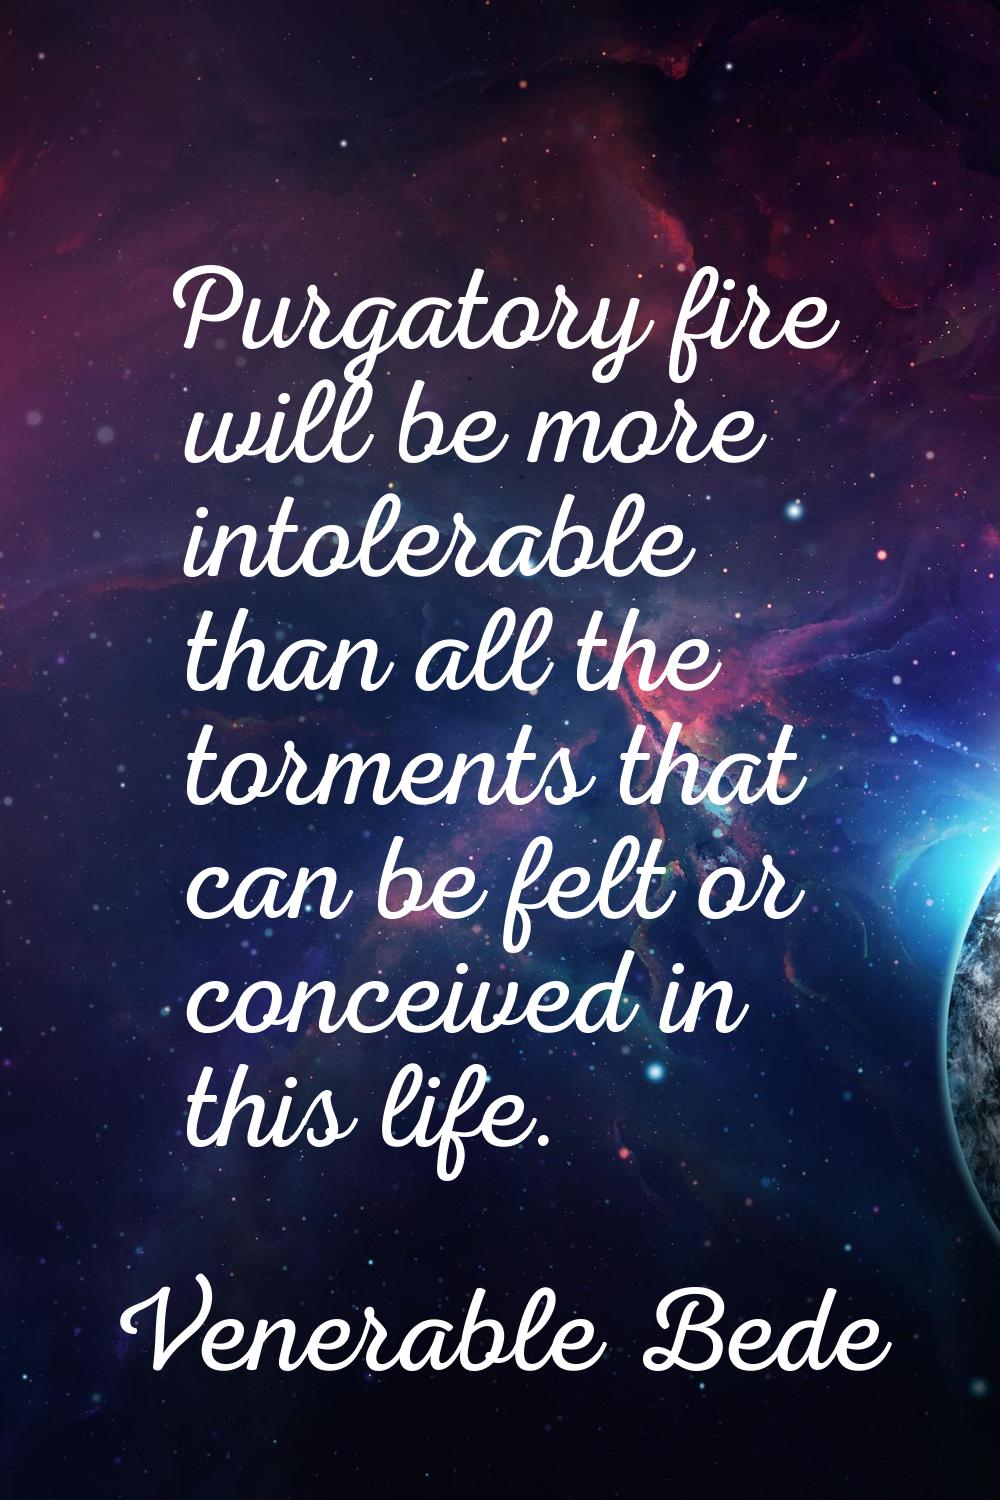 Purgatory fire will be more intolerable than all the torments that can be felt or conceived in this